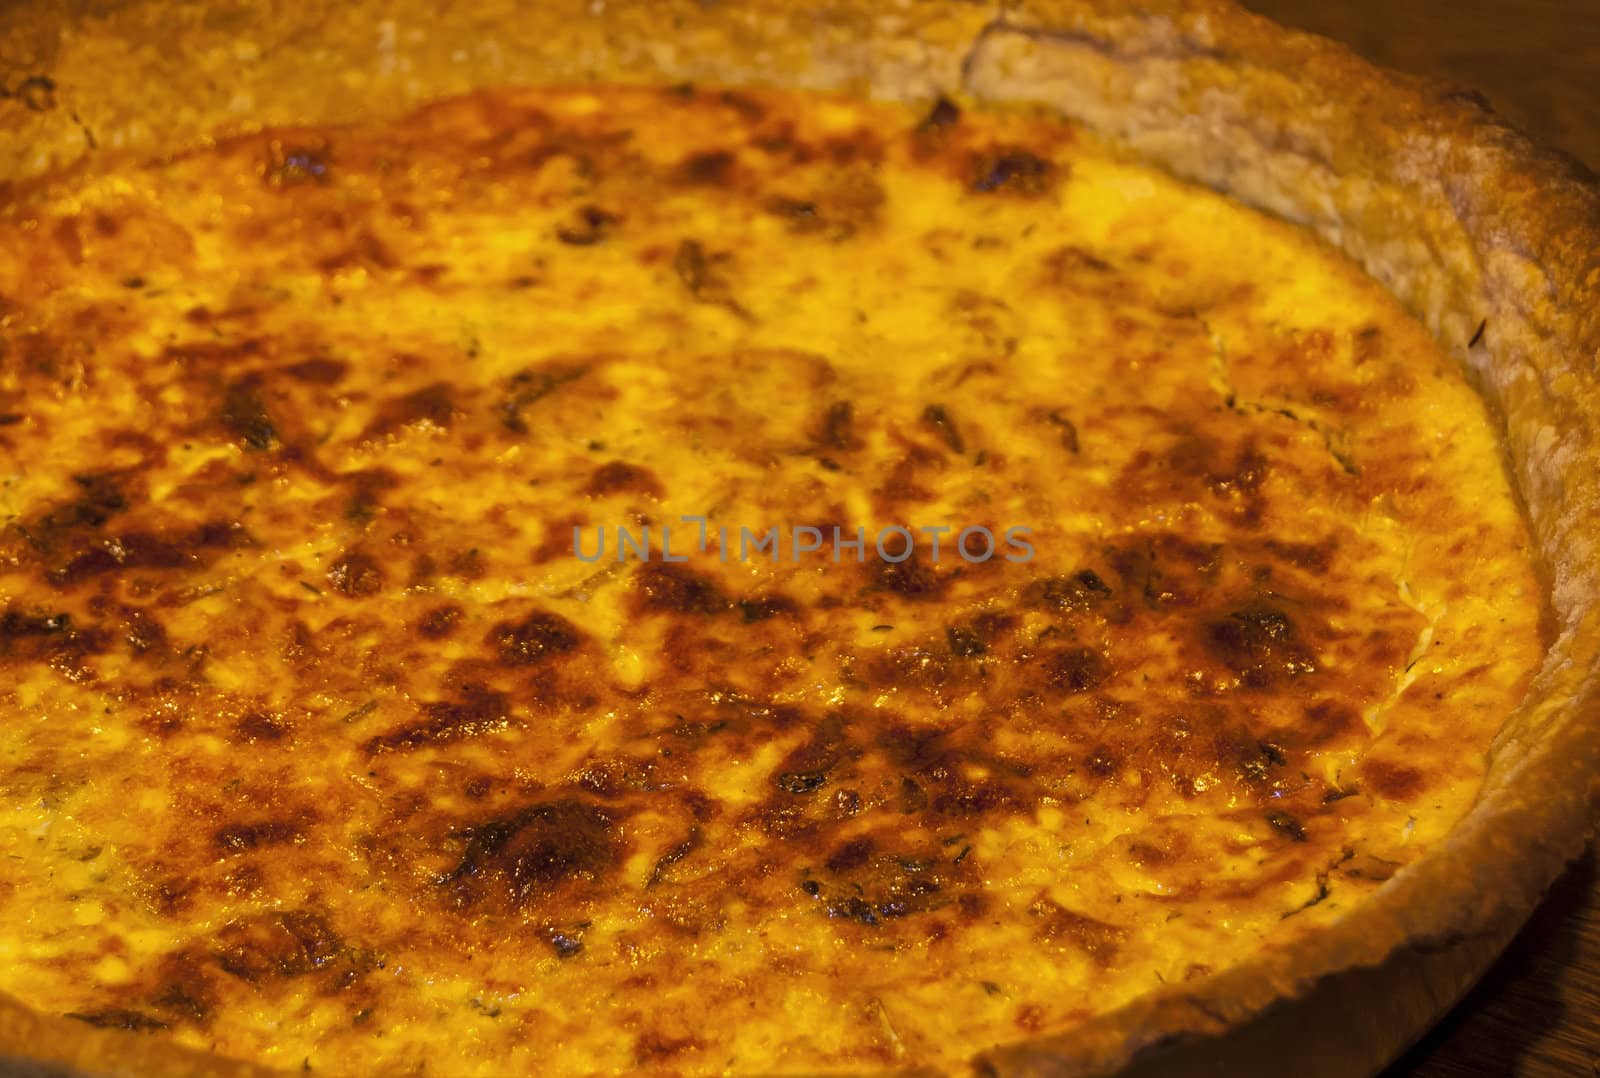 Homemade quiche pie with eggs, cheese,onion closeup